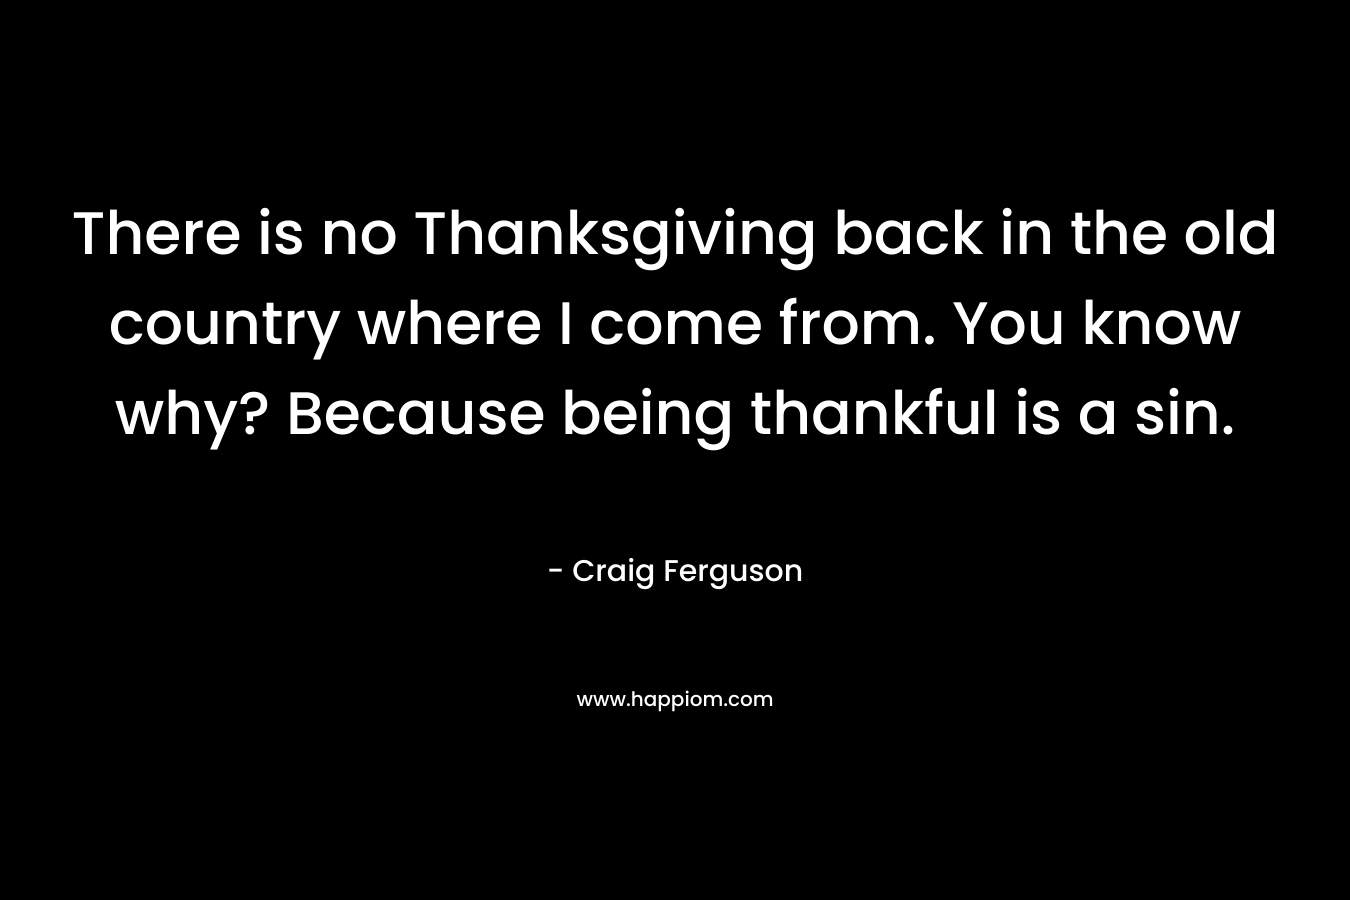 There is no Thanksgiving back in the old country where I come from. You know why? Because being thankful is a sin.